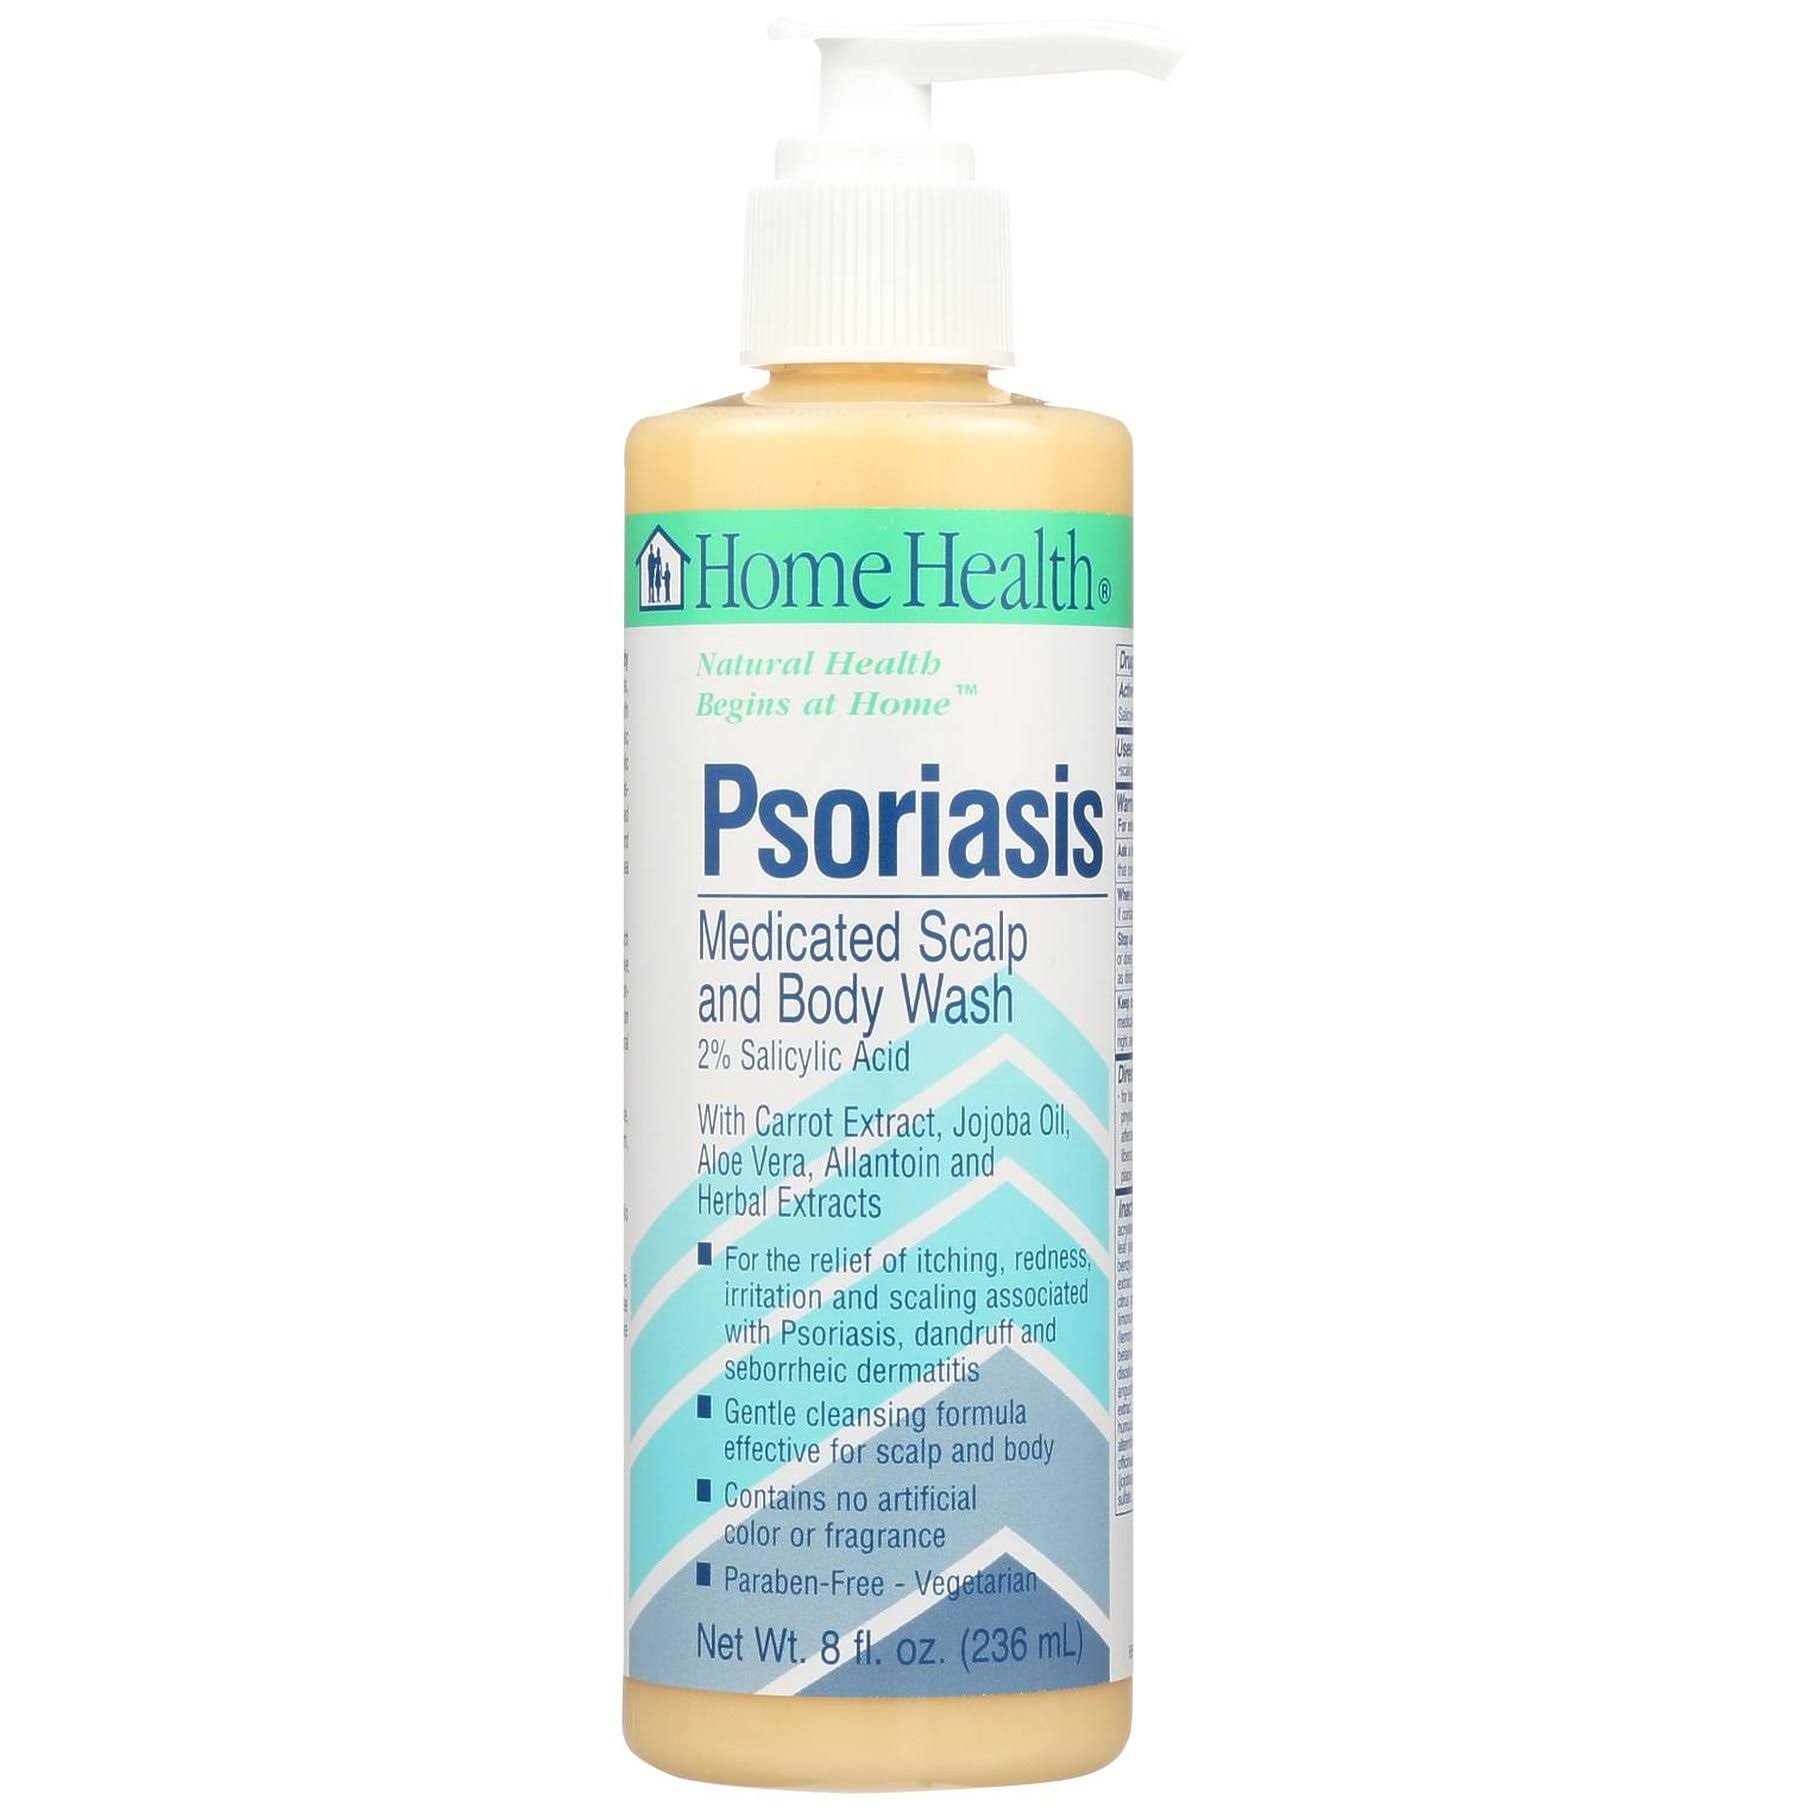 Home Health Psoriasis Medicated Scalp and Body Wash 8 fl.oz